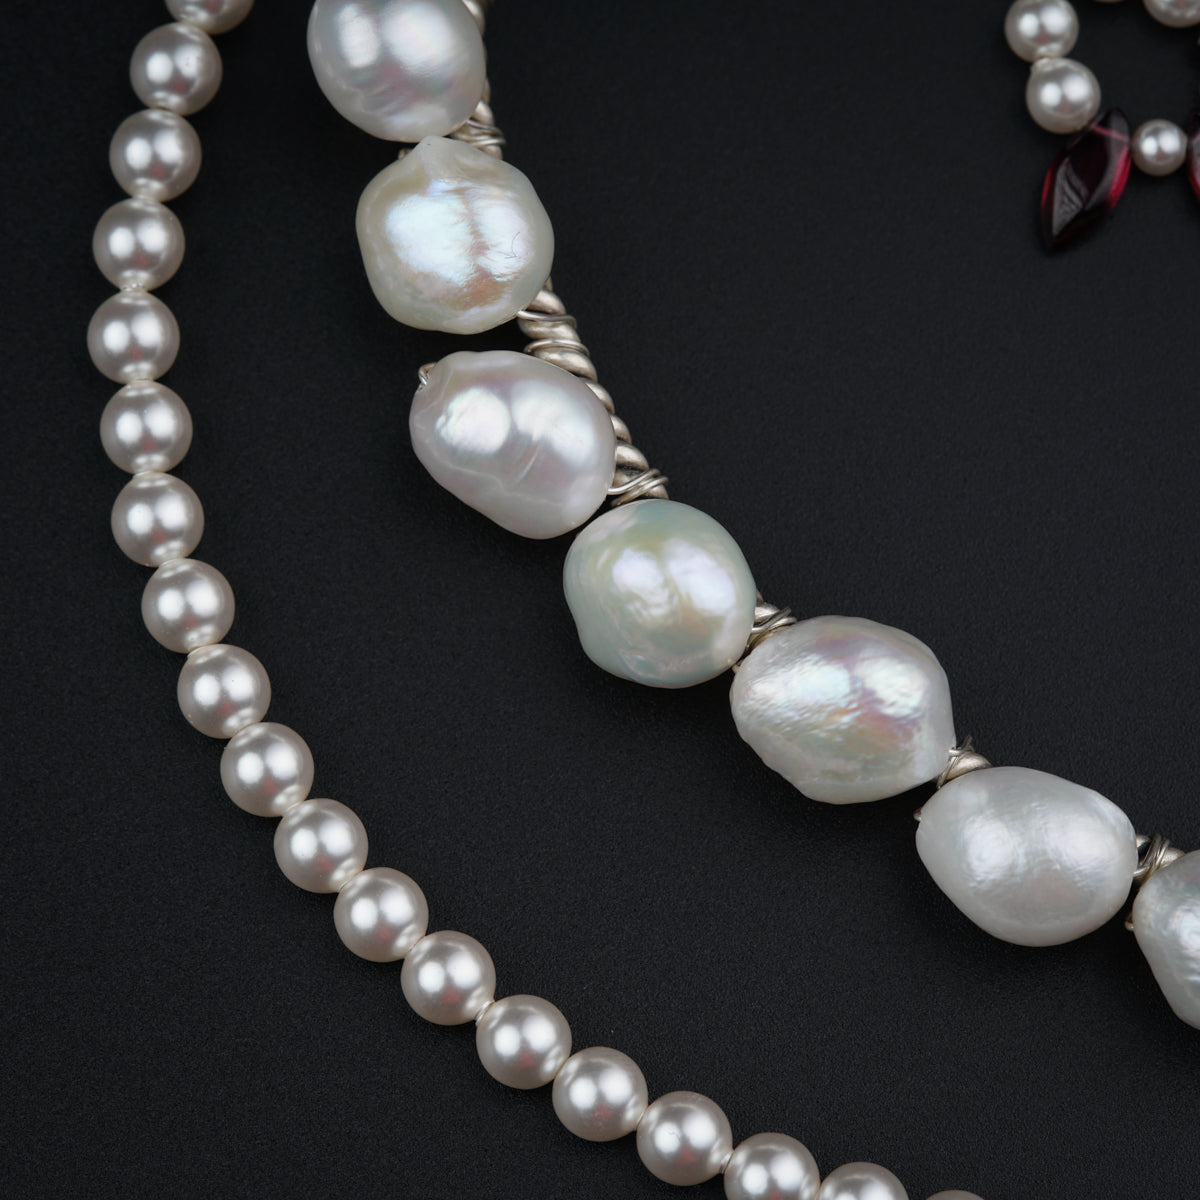 a necklace with a bunch of pearls on it